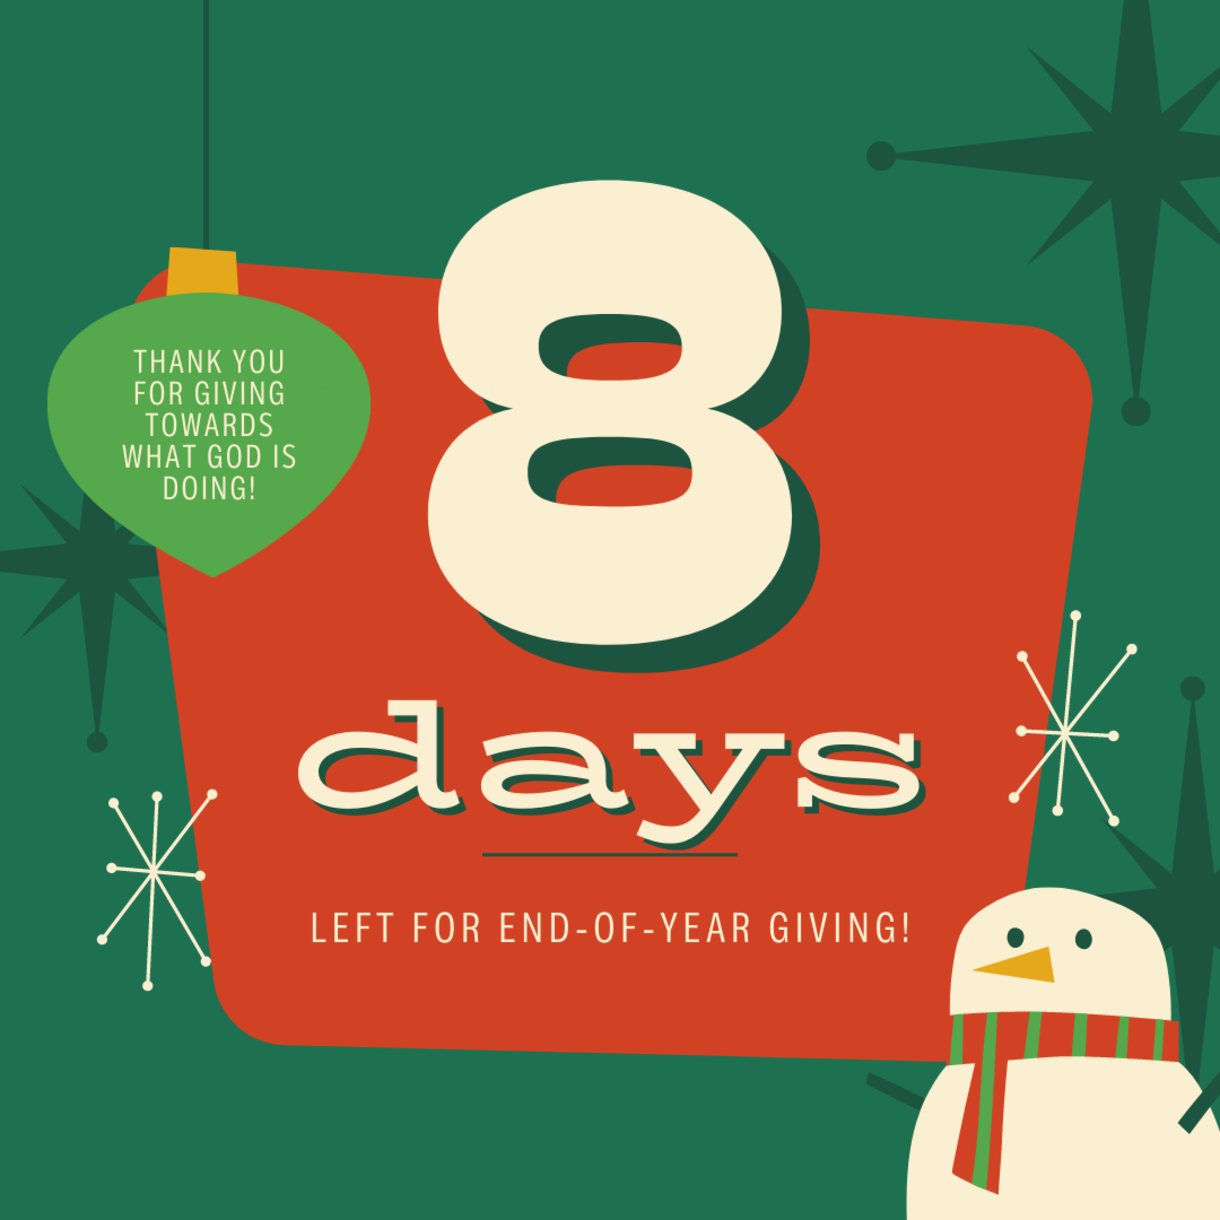 8 days left for year-end giving!